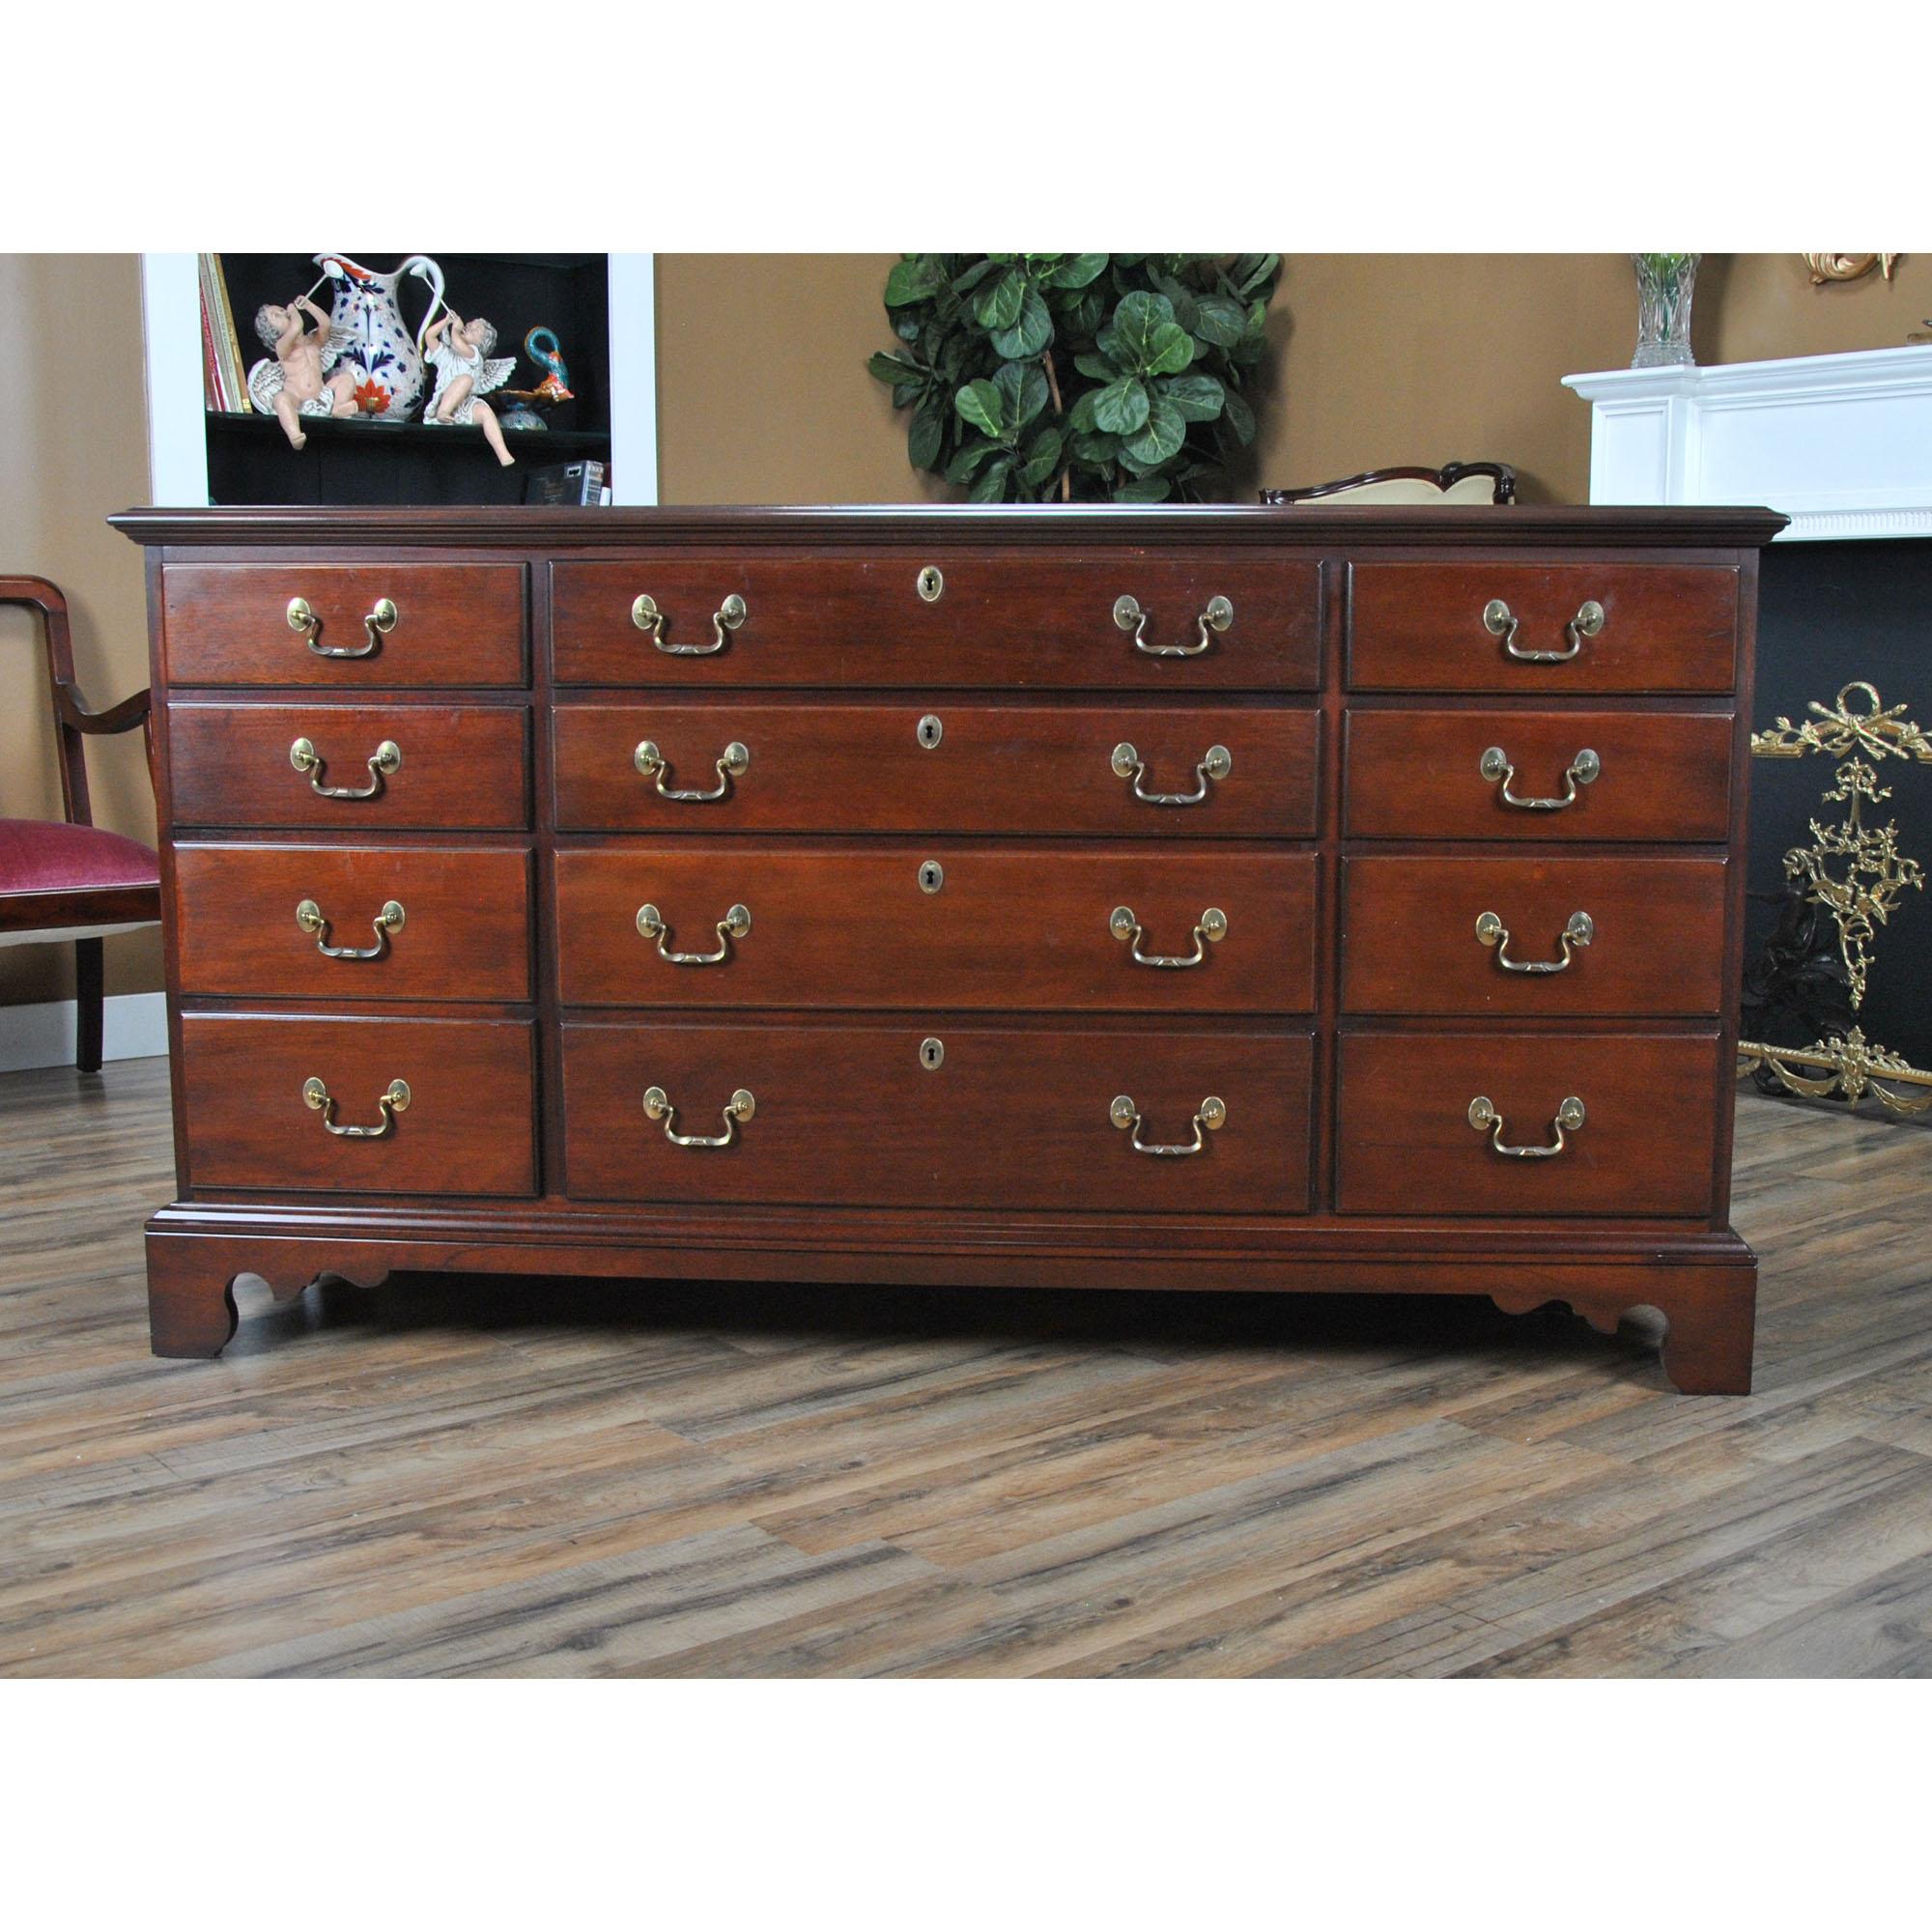 A vintage link-taylor solid mahogany triple dresser produced from solid mahogany. A classic furniture shape this chest features three drawers across the width of the chest and gradually larger drawers through the height of the piece giving this